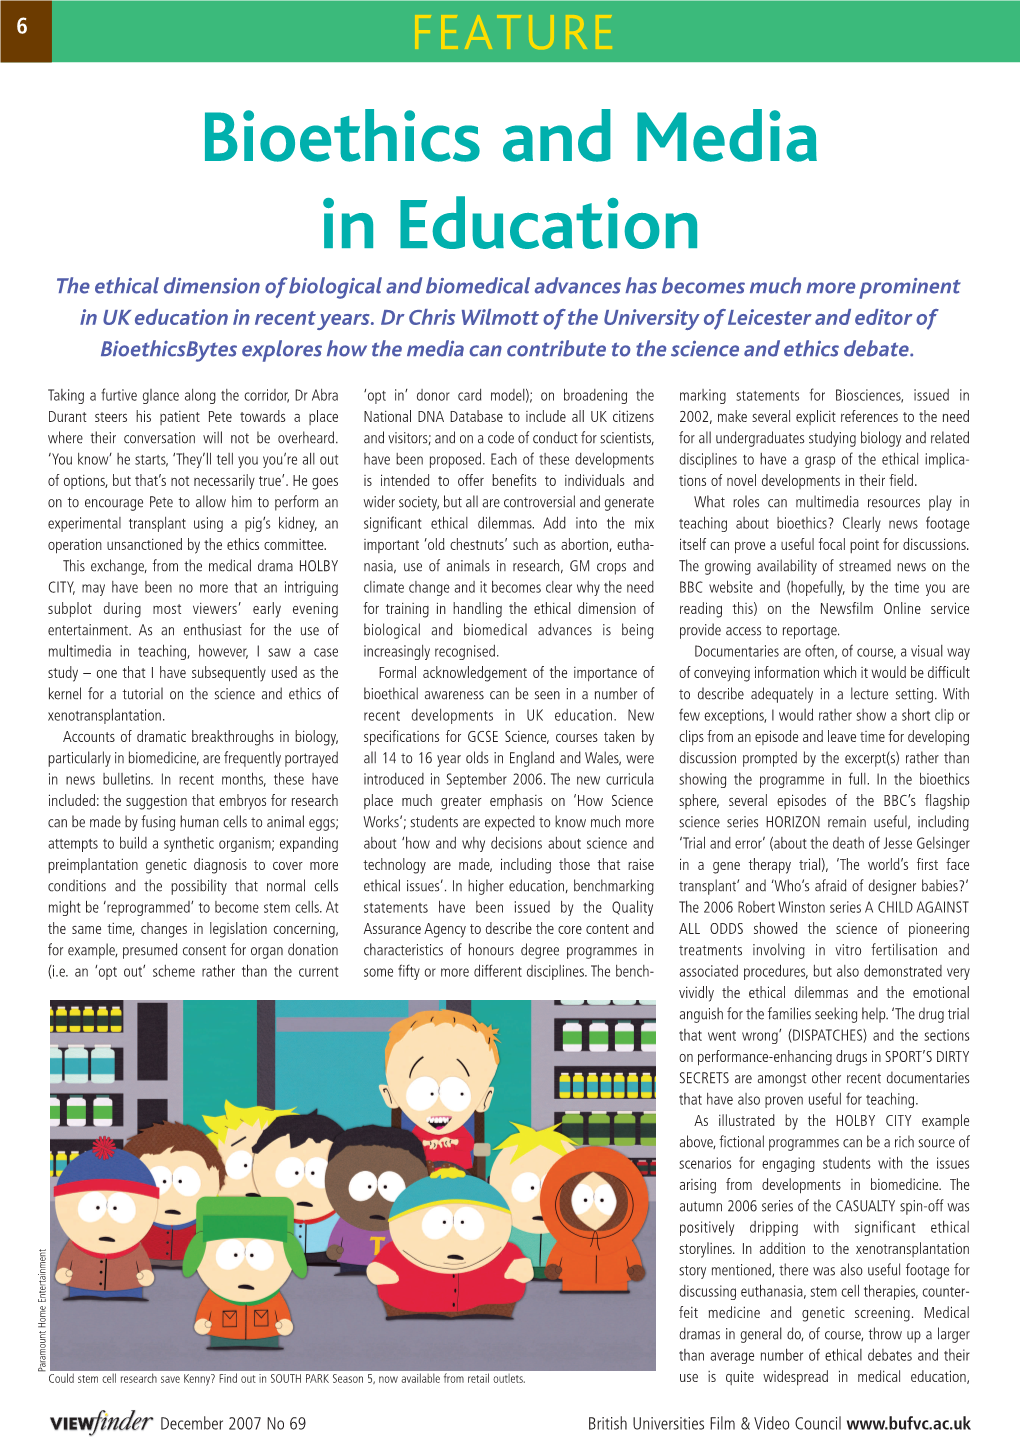 Bioethics and Media in Education the Ethical Dimension of Biological and Biomedical Advances Has Becomes Much More Prominent in UK Education in Recent Years